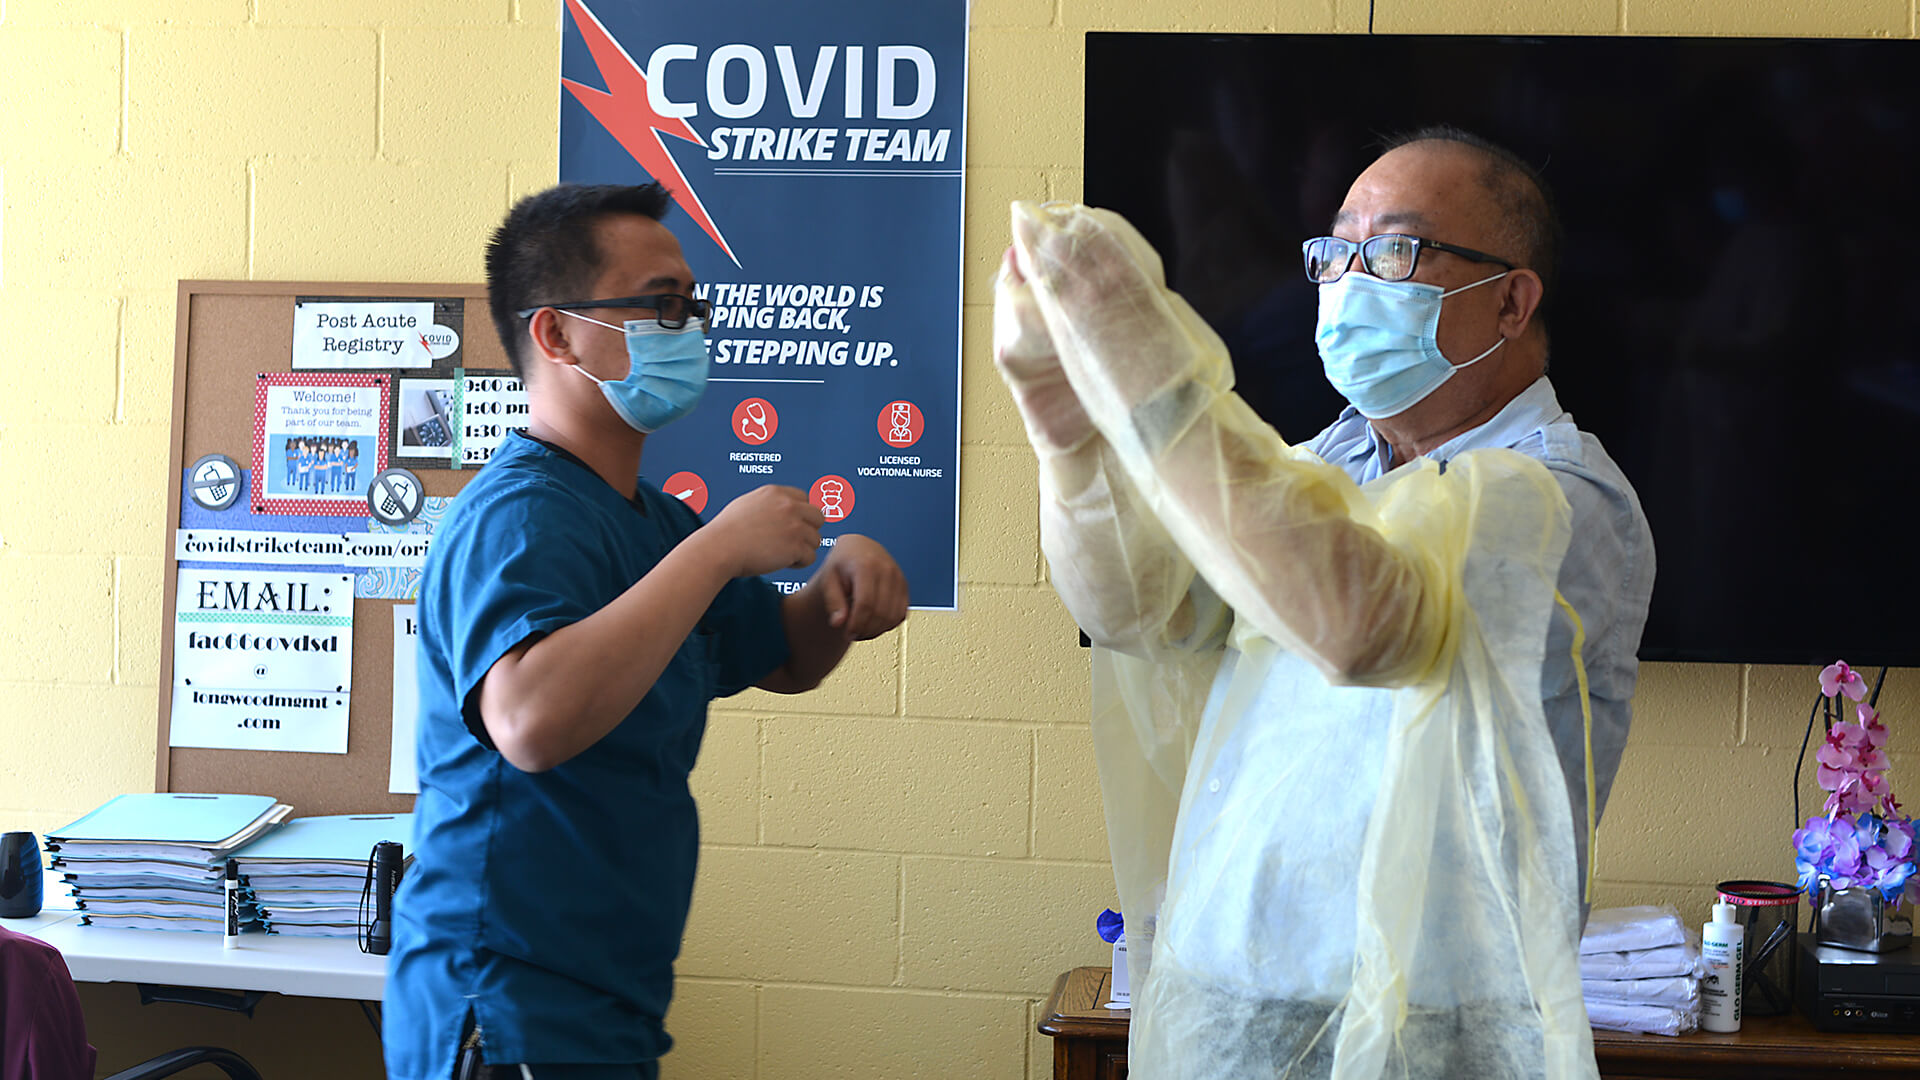 Volunteers participate in a COVID-19 demonstration at the Eastland Subacute and Rehabilitation Center in El Monte, California.